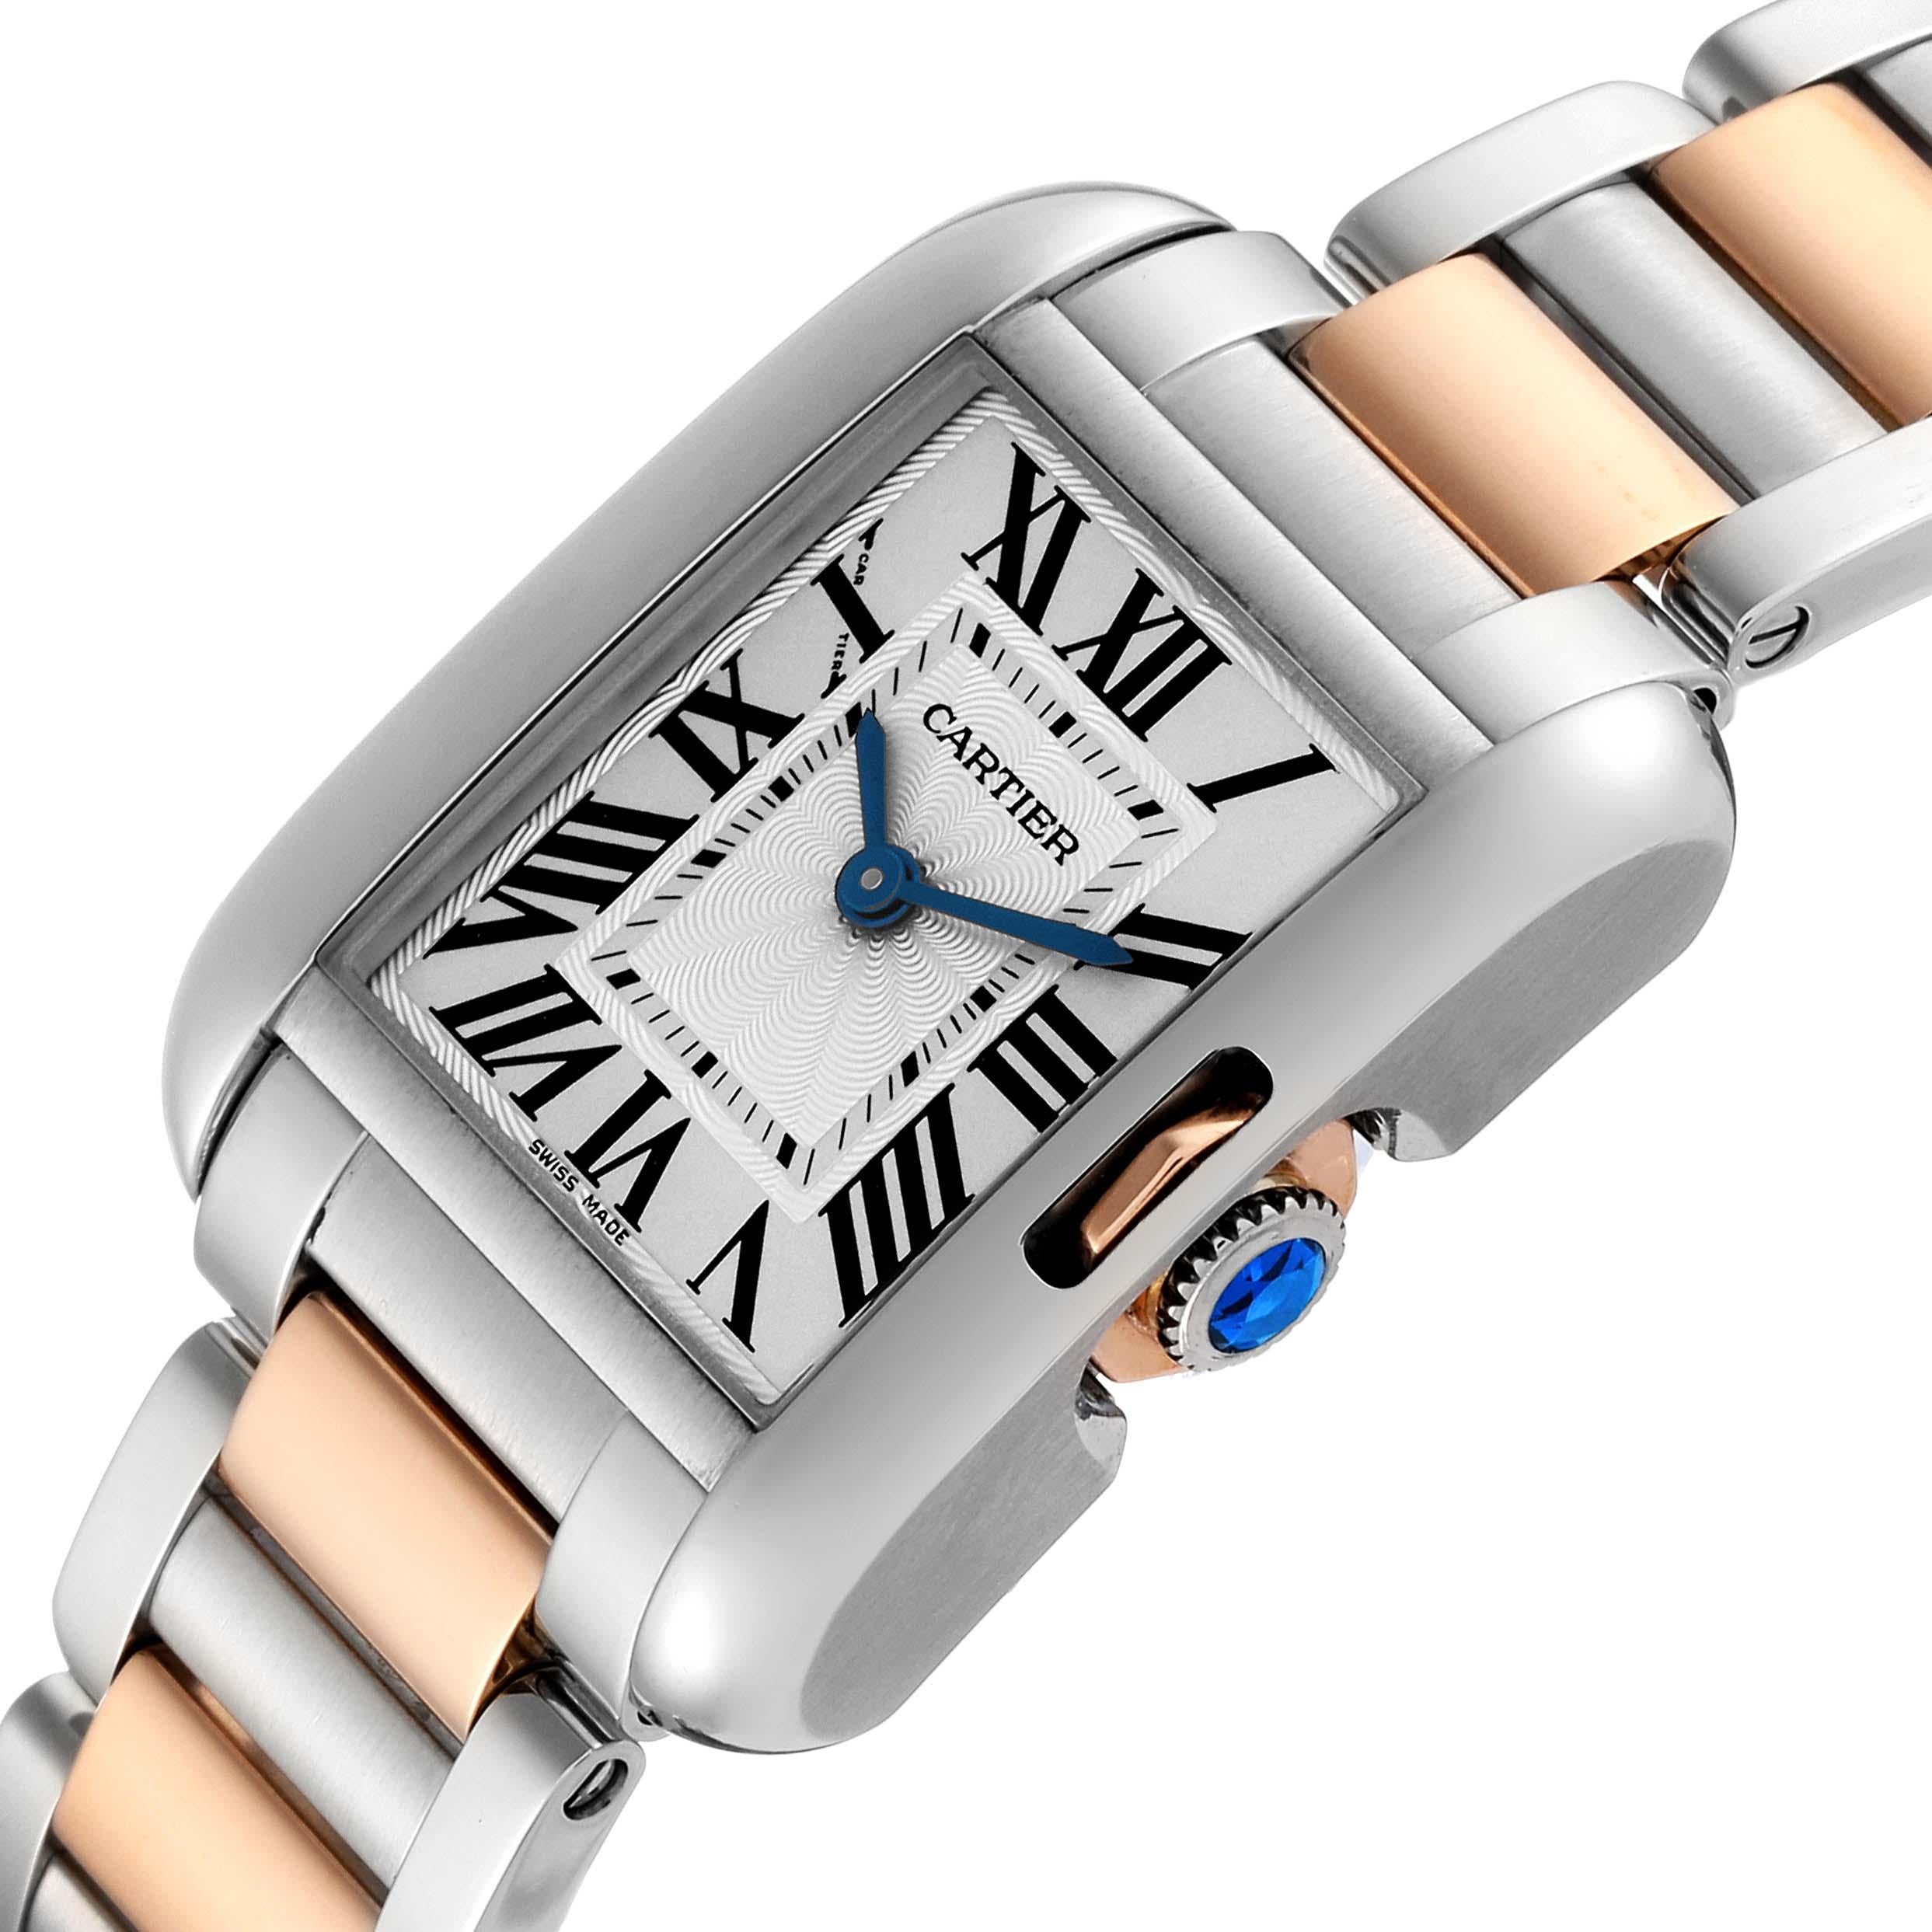 Cartier Tank Anglaise Small Steel Rose Gold Ladies Watch W5310036 Box Papers In Excellent Condition For Sale In Atlanta, GA